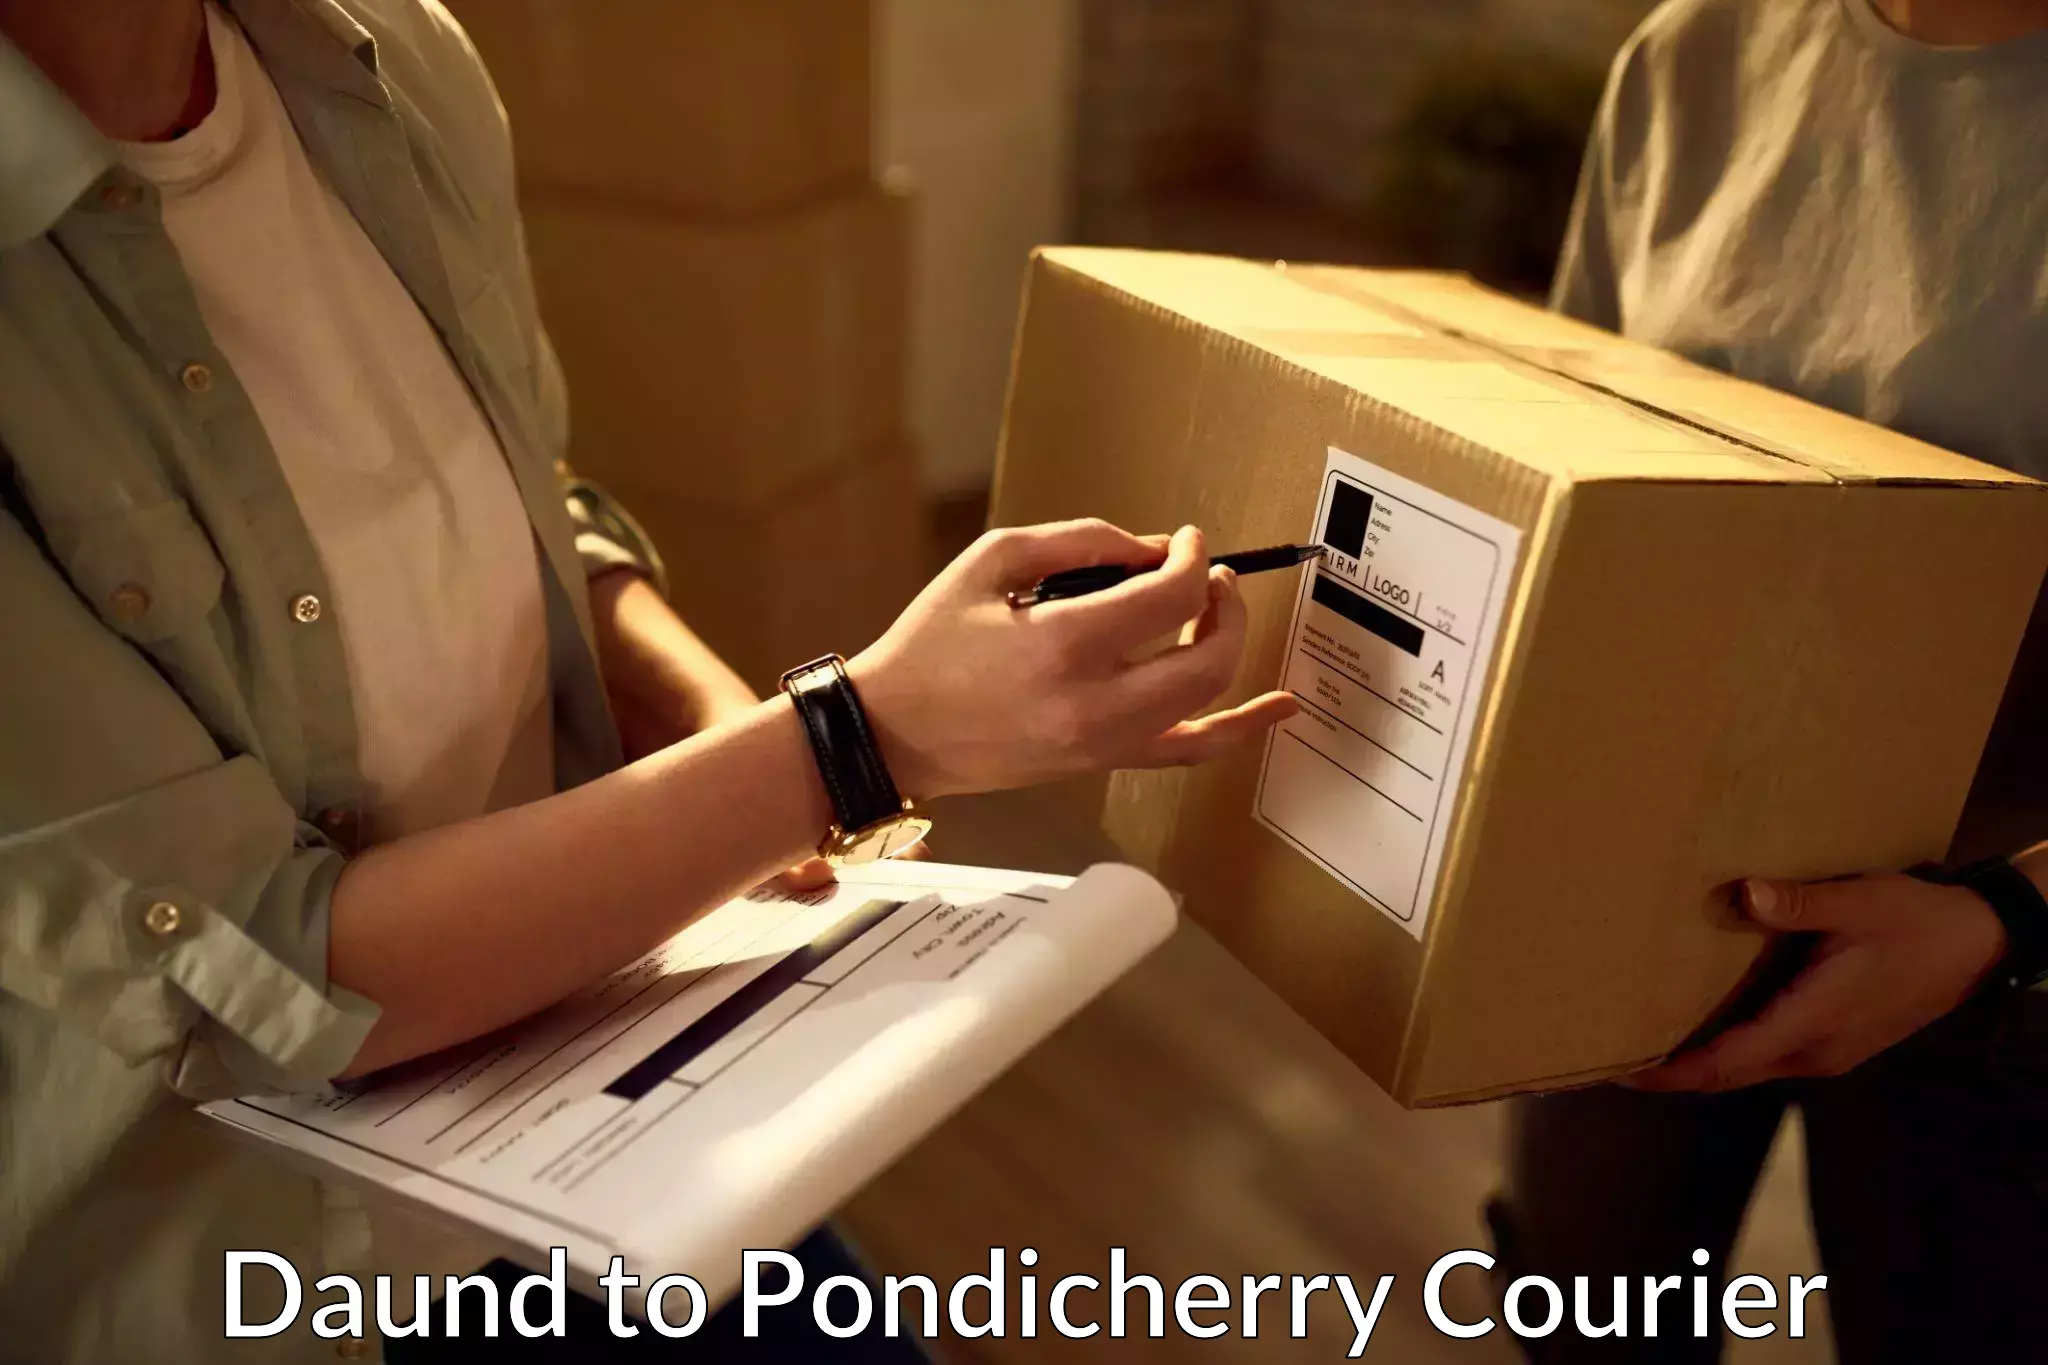 Subscription-based courier Daund to Pondicherry